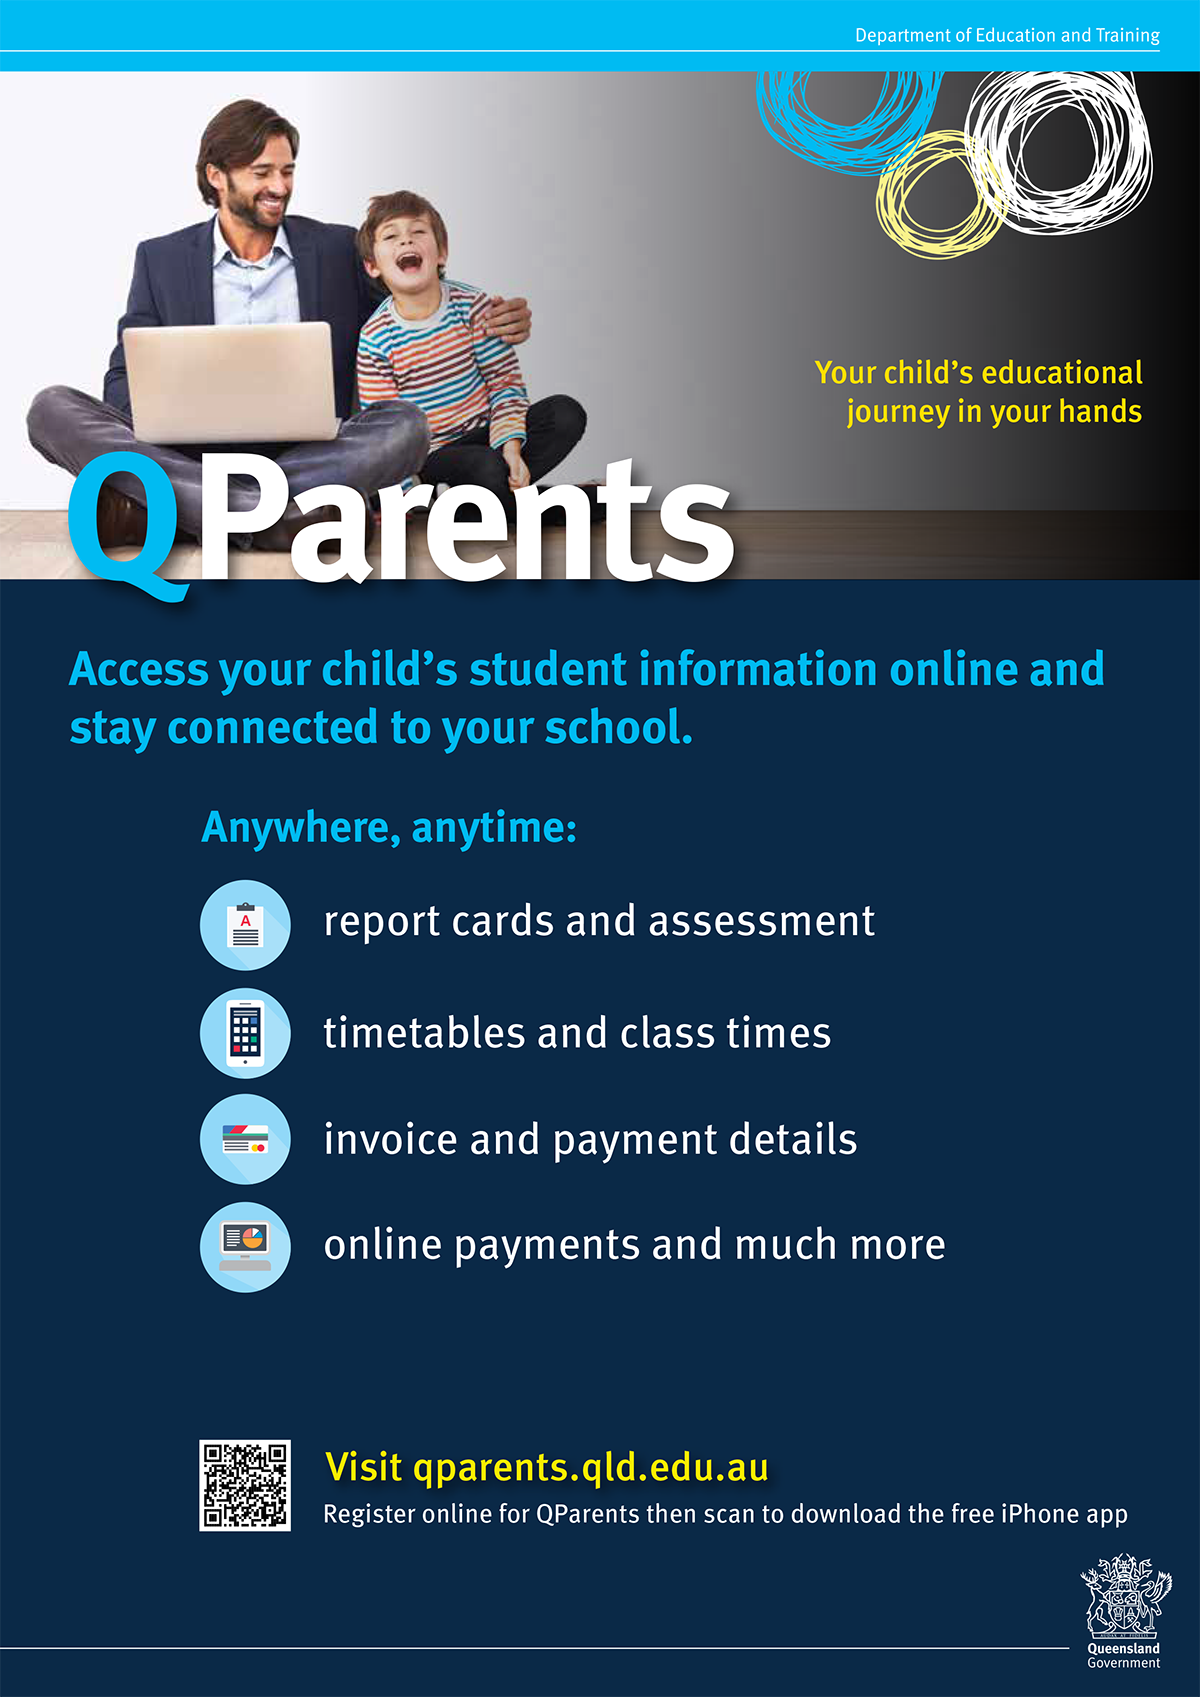 qparents-infographic.png